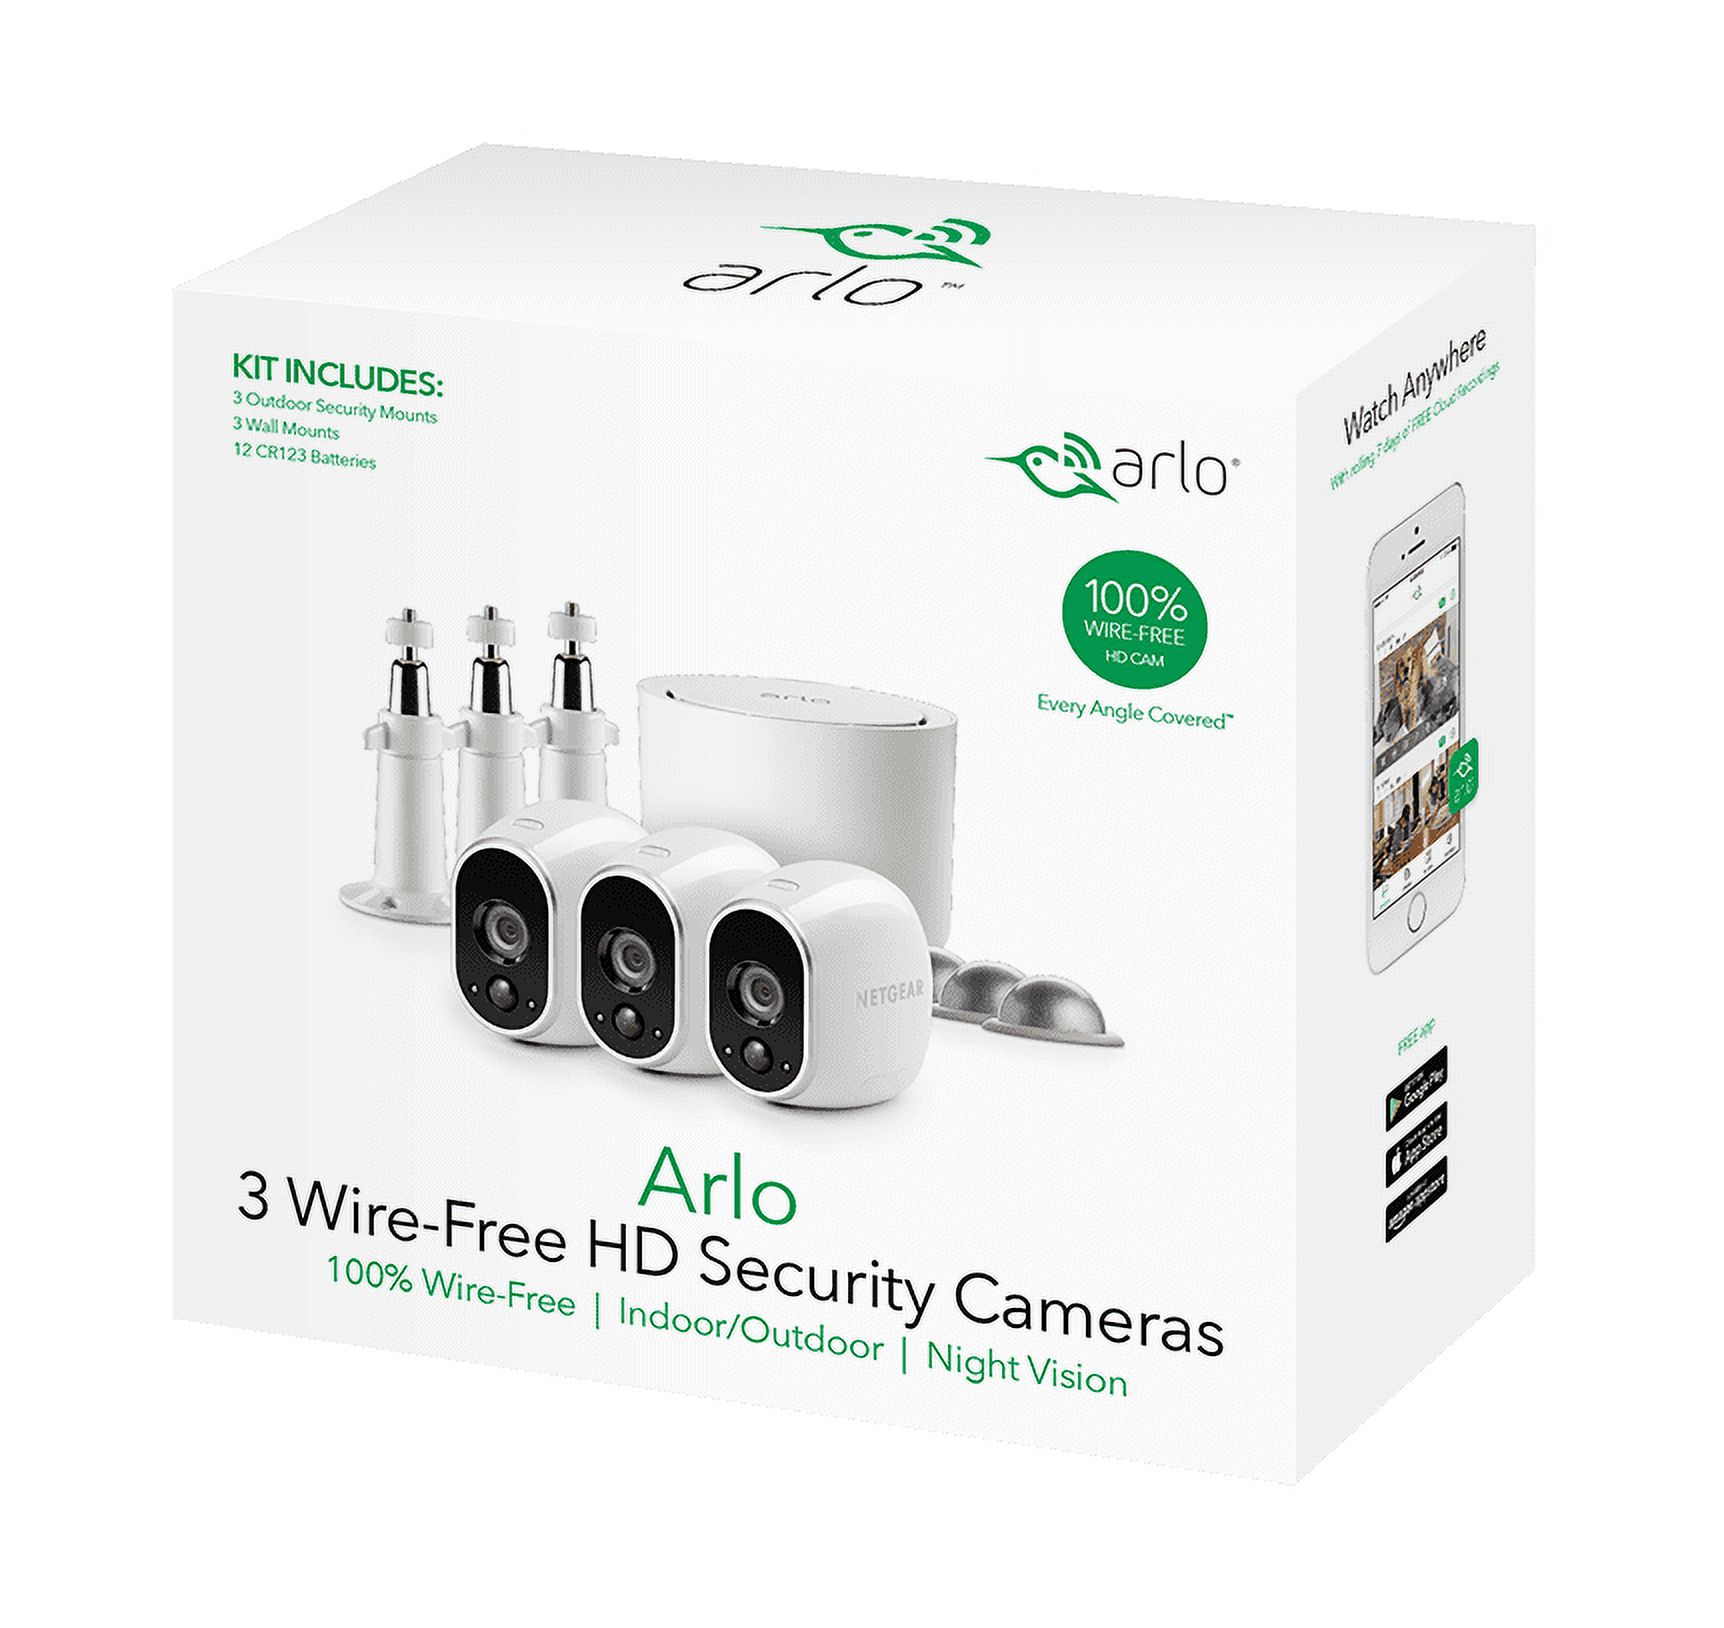 Arlo 720P HD Security Camera System VMS3330W - 3 Wire-Free Cameras with 3 Additional Wall Mounts and 3 Outdoor Mounts, Indoor/Outdoor, Night Vision, Motion Detection - image 1 of 20